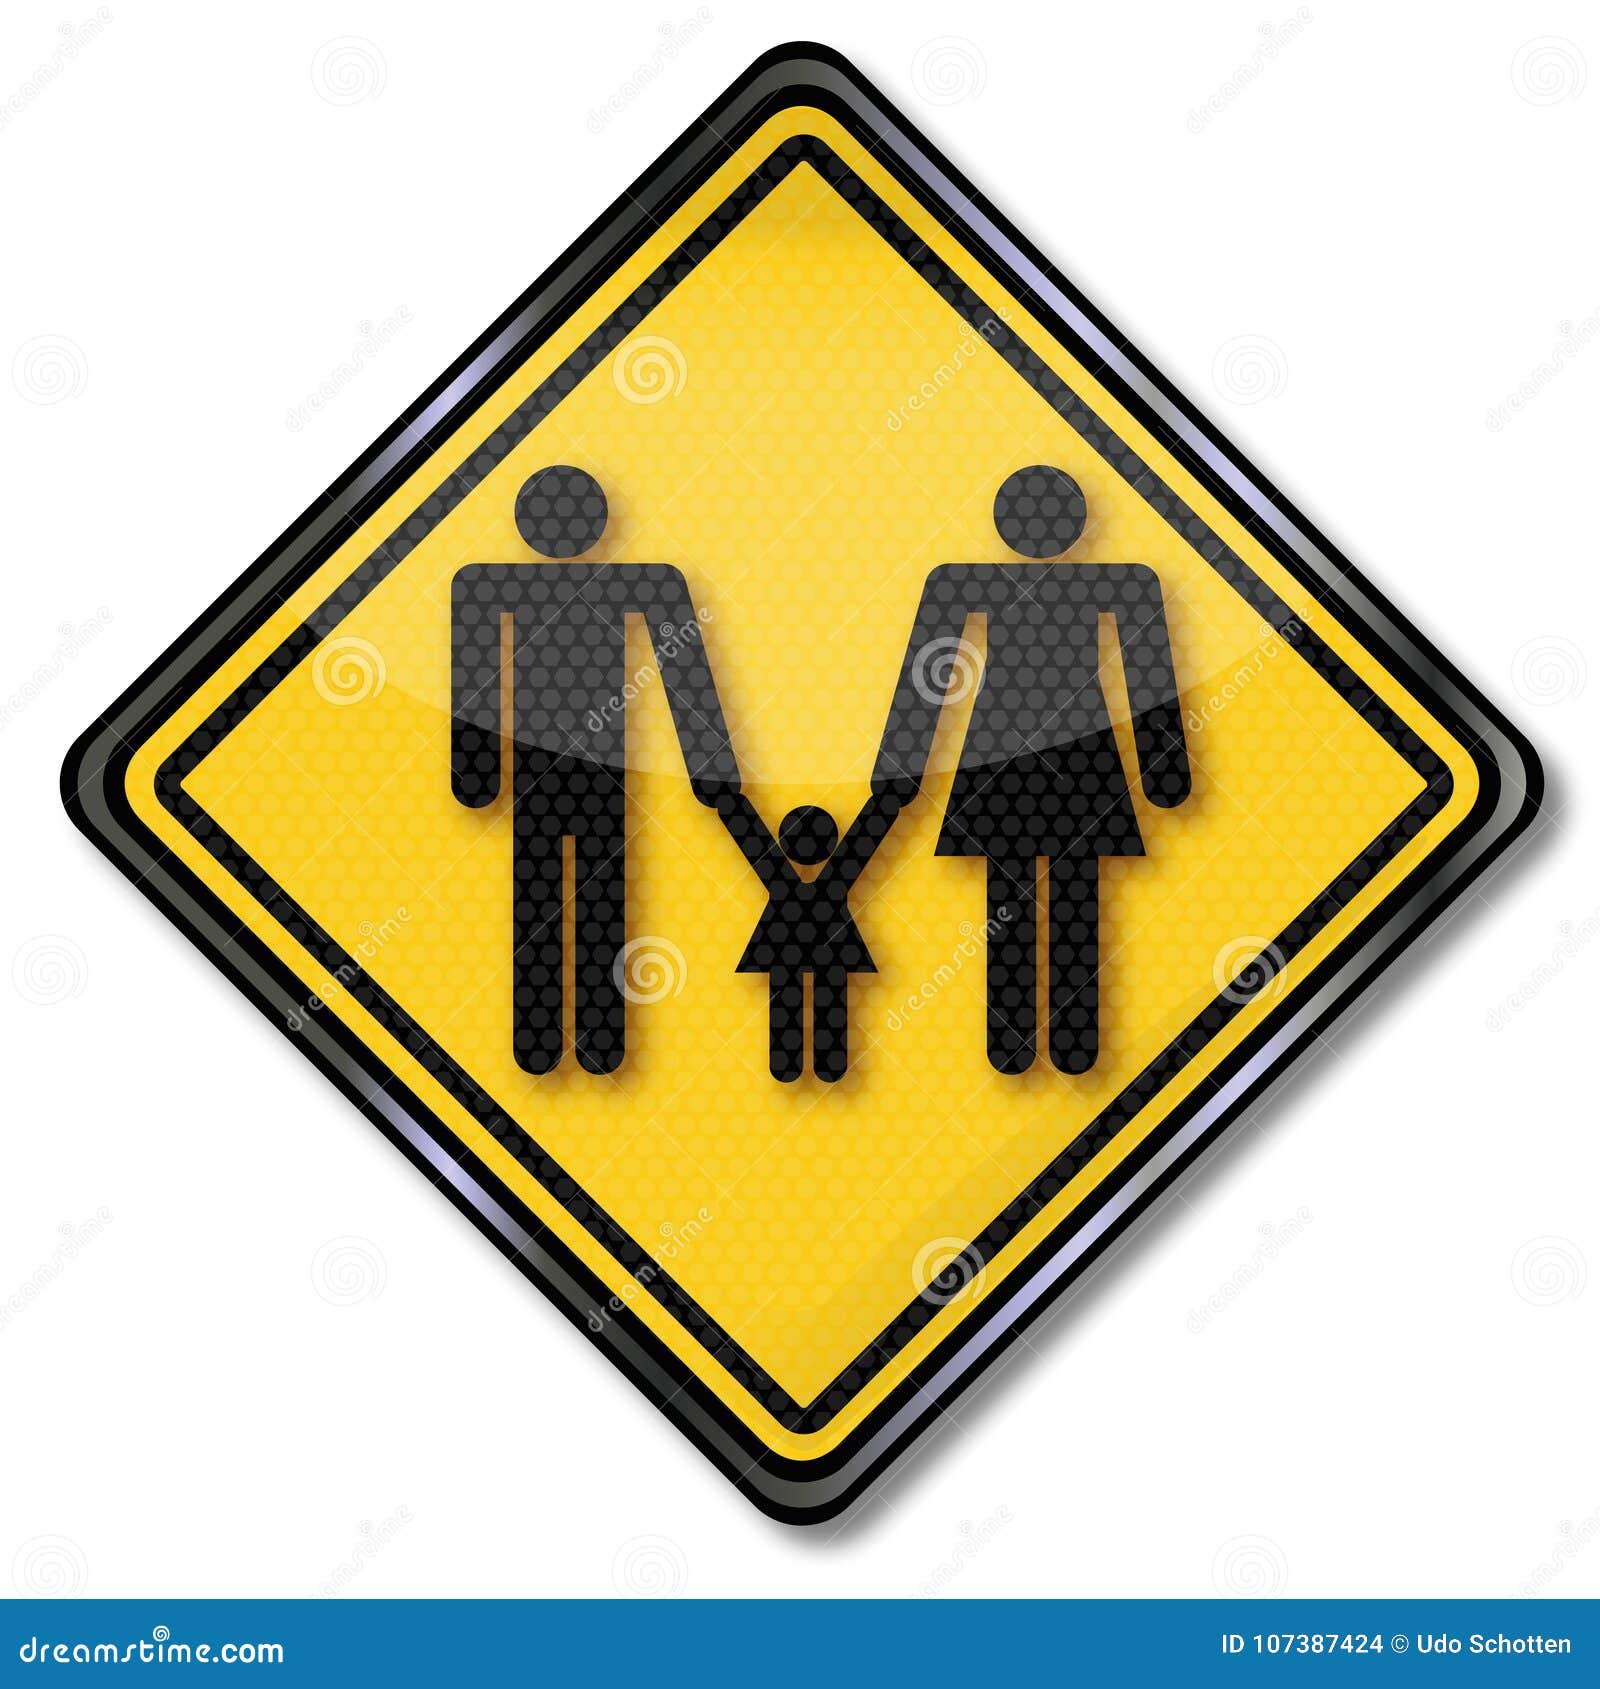 Download Nuclear Family And Blended Families Stock Image ...